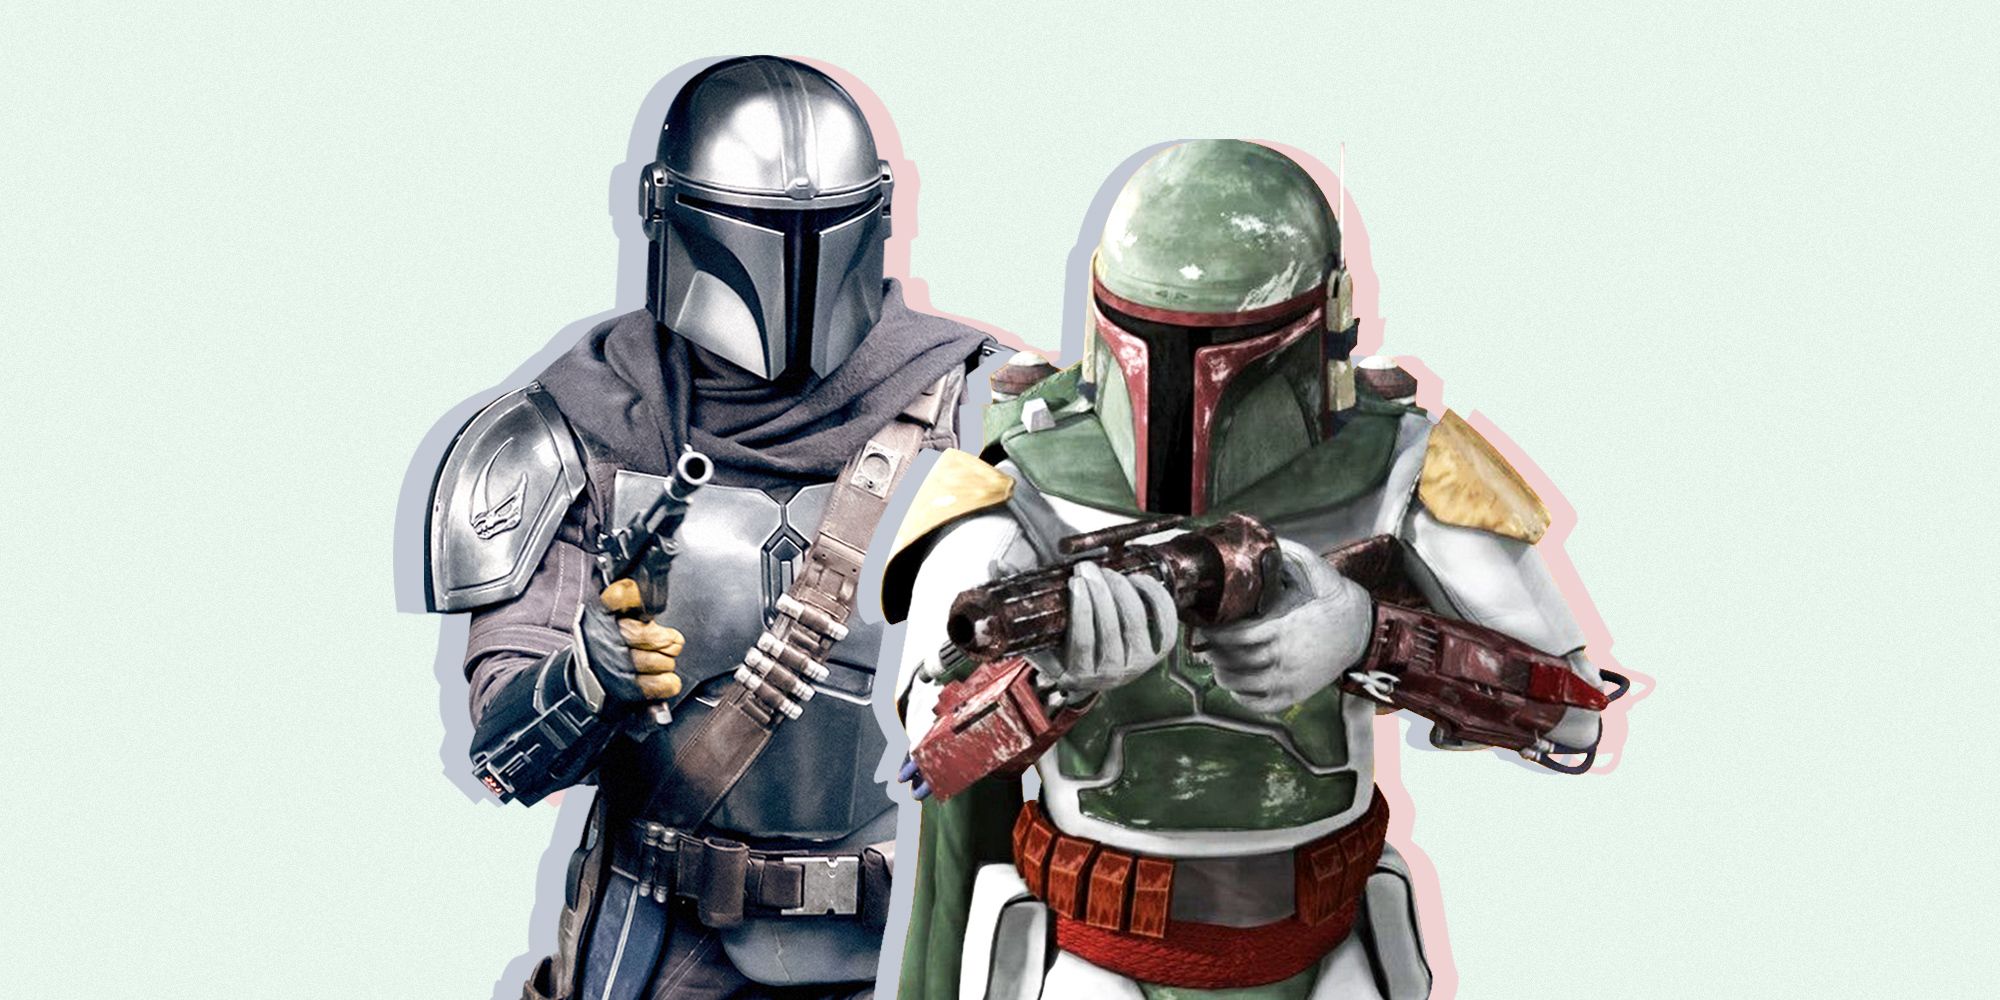 Star Wars - CoveredGeekly on X: The full official episode schedule for  'THE MANDALORIAN' Season 3 has been released. The season starts on March 1  with Episode 1 and ends on April